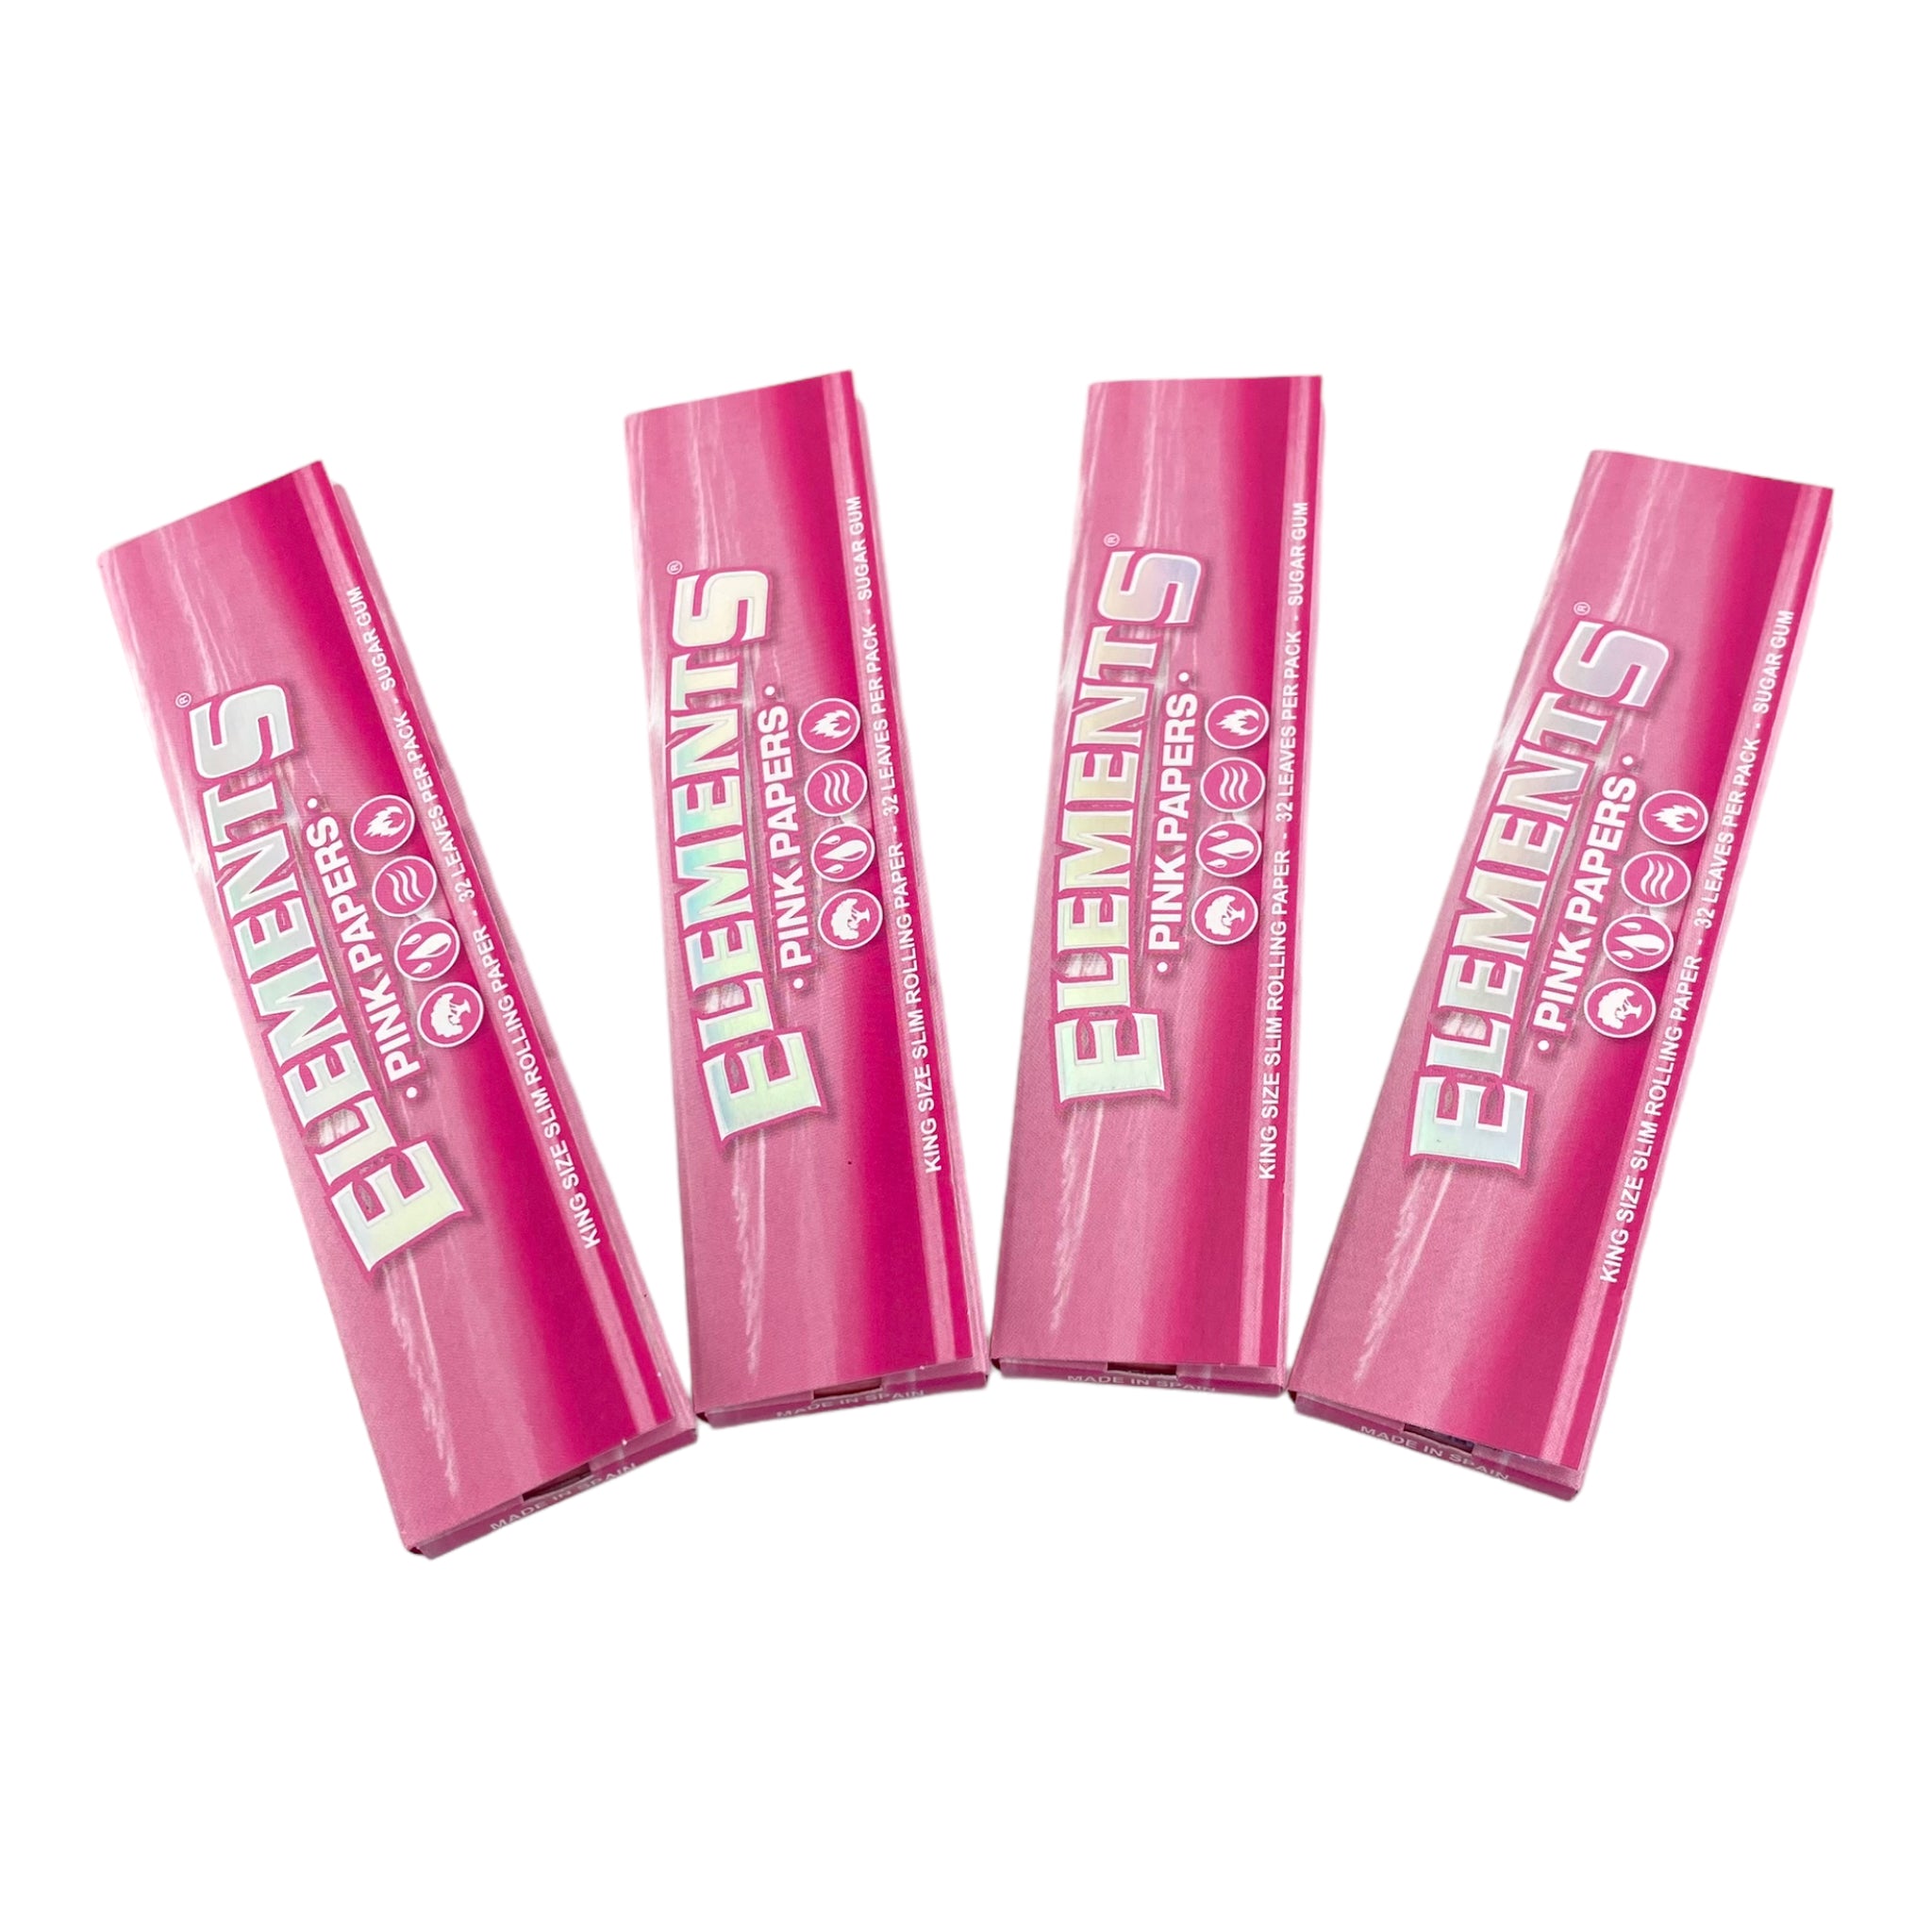 Elements Pink King Size Slim Papers 4 Packs